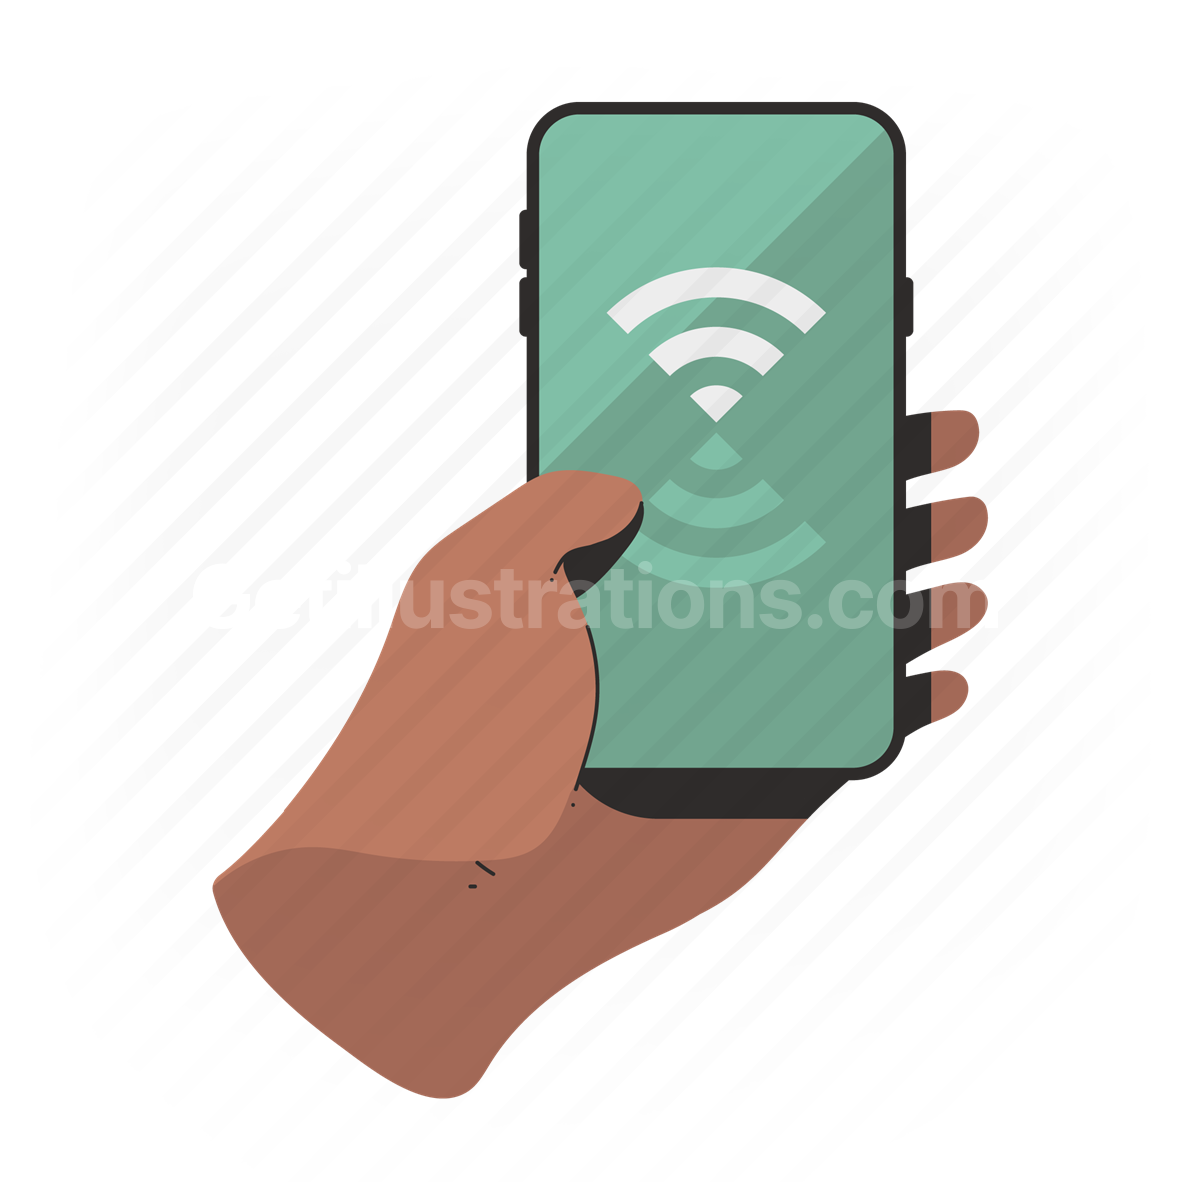 connection, signal, smartphone, electronic, device